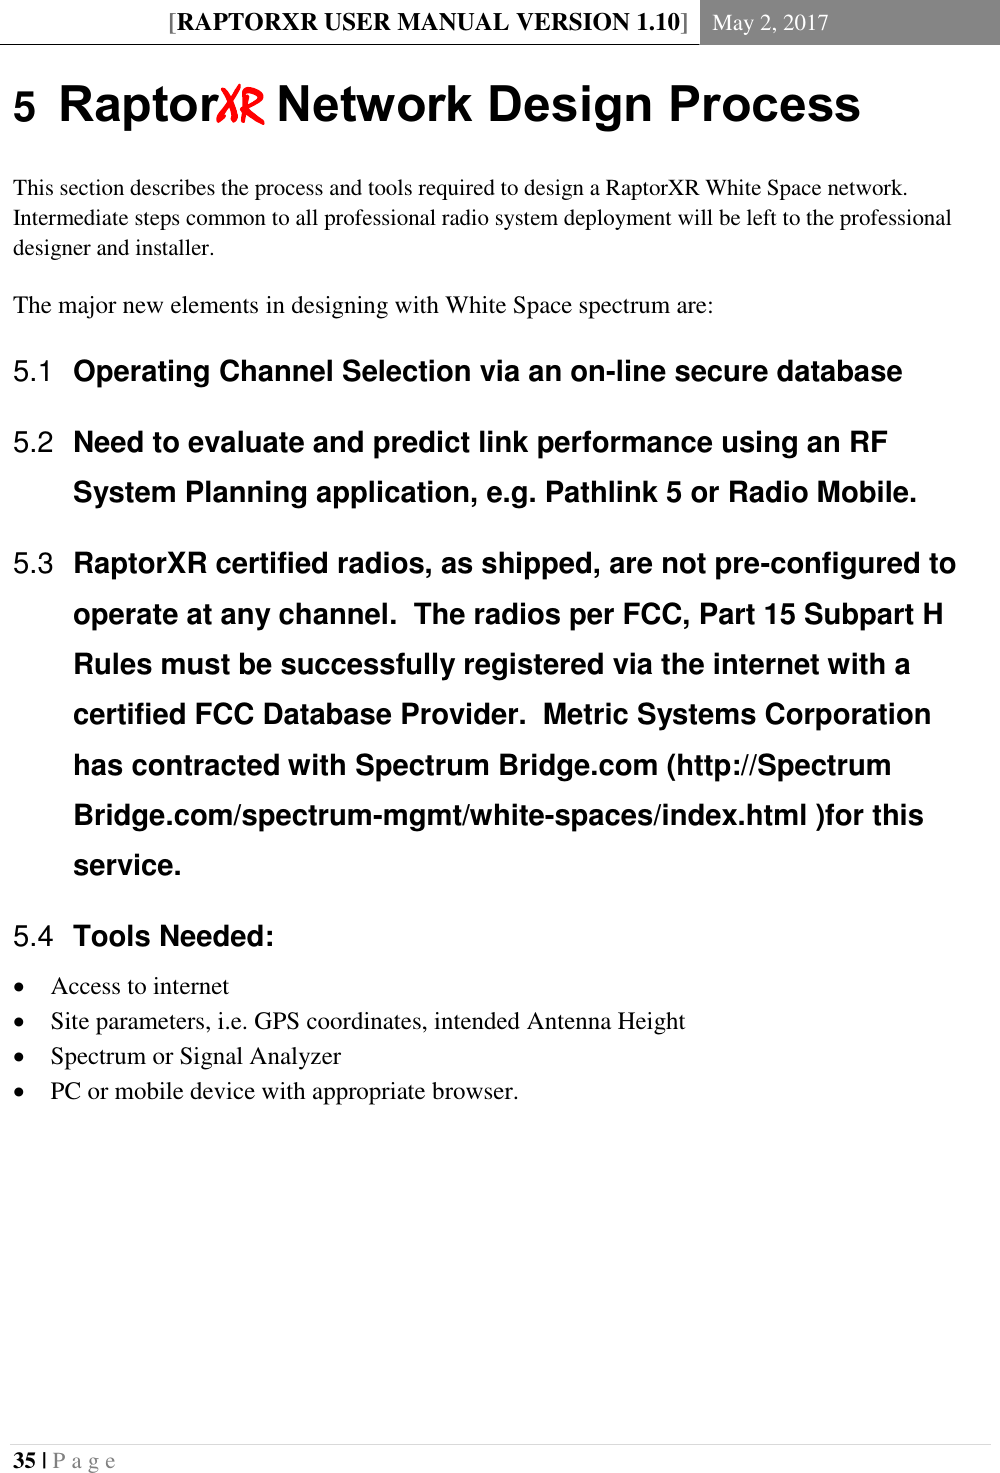 [RAPTORXR USER MANUAL VERSION 1.10] May 2, 2017  35 | P a g e   5  RaptorXR Network Design Process This section describes the process and tools required to design a RaptorXR White Space network. Intermediate steps common to all professional radio system deployment will be left to the professional designer and installer. The major new elements in designing with White Space spectrum are:  Operating Channel Selection via an on-line secure database 5.1 Need to evaluate and predict link performance using an RF 5.2System Planning application, e.g. Pathlink 5 or Radio Mobile.  RaptorXR certified radios, as shipped, are not pre-configured to 5.3operate at any channel.  The radios per FCC, Part 15 Subpart H Rules must be successfully registered via the internet with a certified FCC Database Provider.  Metric Systems Corporation has contracted with Spectrum Bridge.com (http://Spectrum Bridge.com/spectrum-mgmt/white-spaces/index.html )for this service.  Tools Needed: 5.4 Access to internet  Site parameters, i.e. GPS coordinates, intended Antenna Height  Spectrum or Signal Analyzer  PC or mobile device with appropriate browser.    